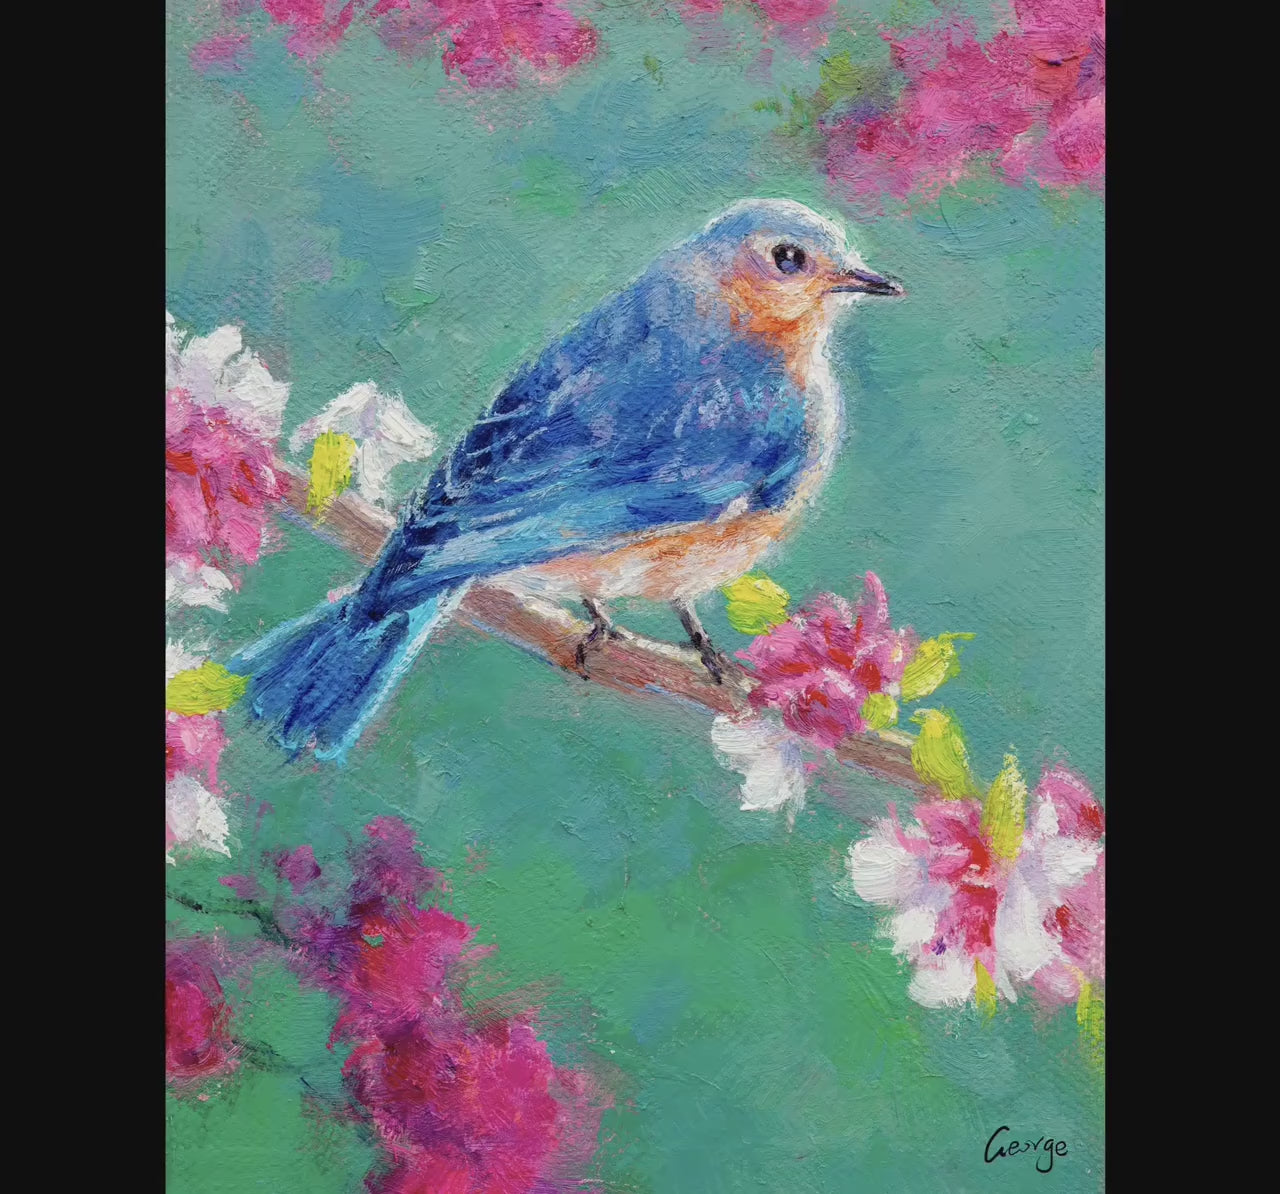 Small Oil Painting Blue Bird, Artwork, Paintings On Canvas, Original Painting Bird, Small Wall Art, Impressionist Art, Textured Painting